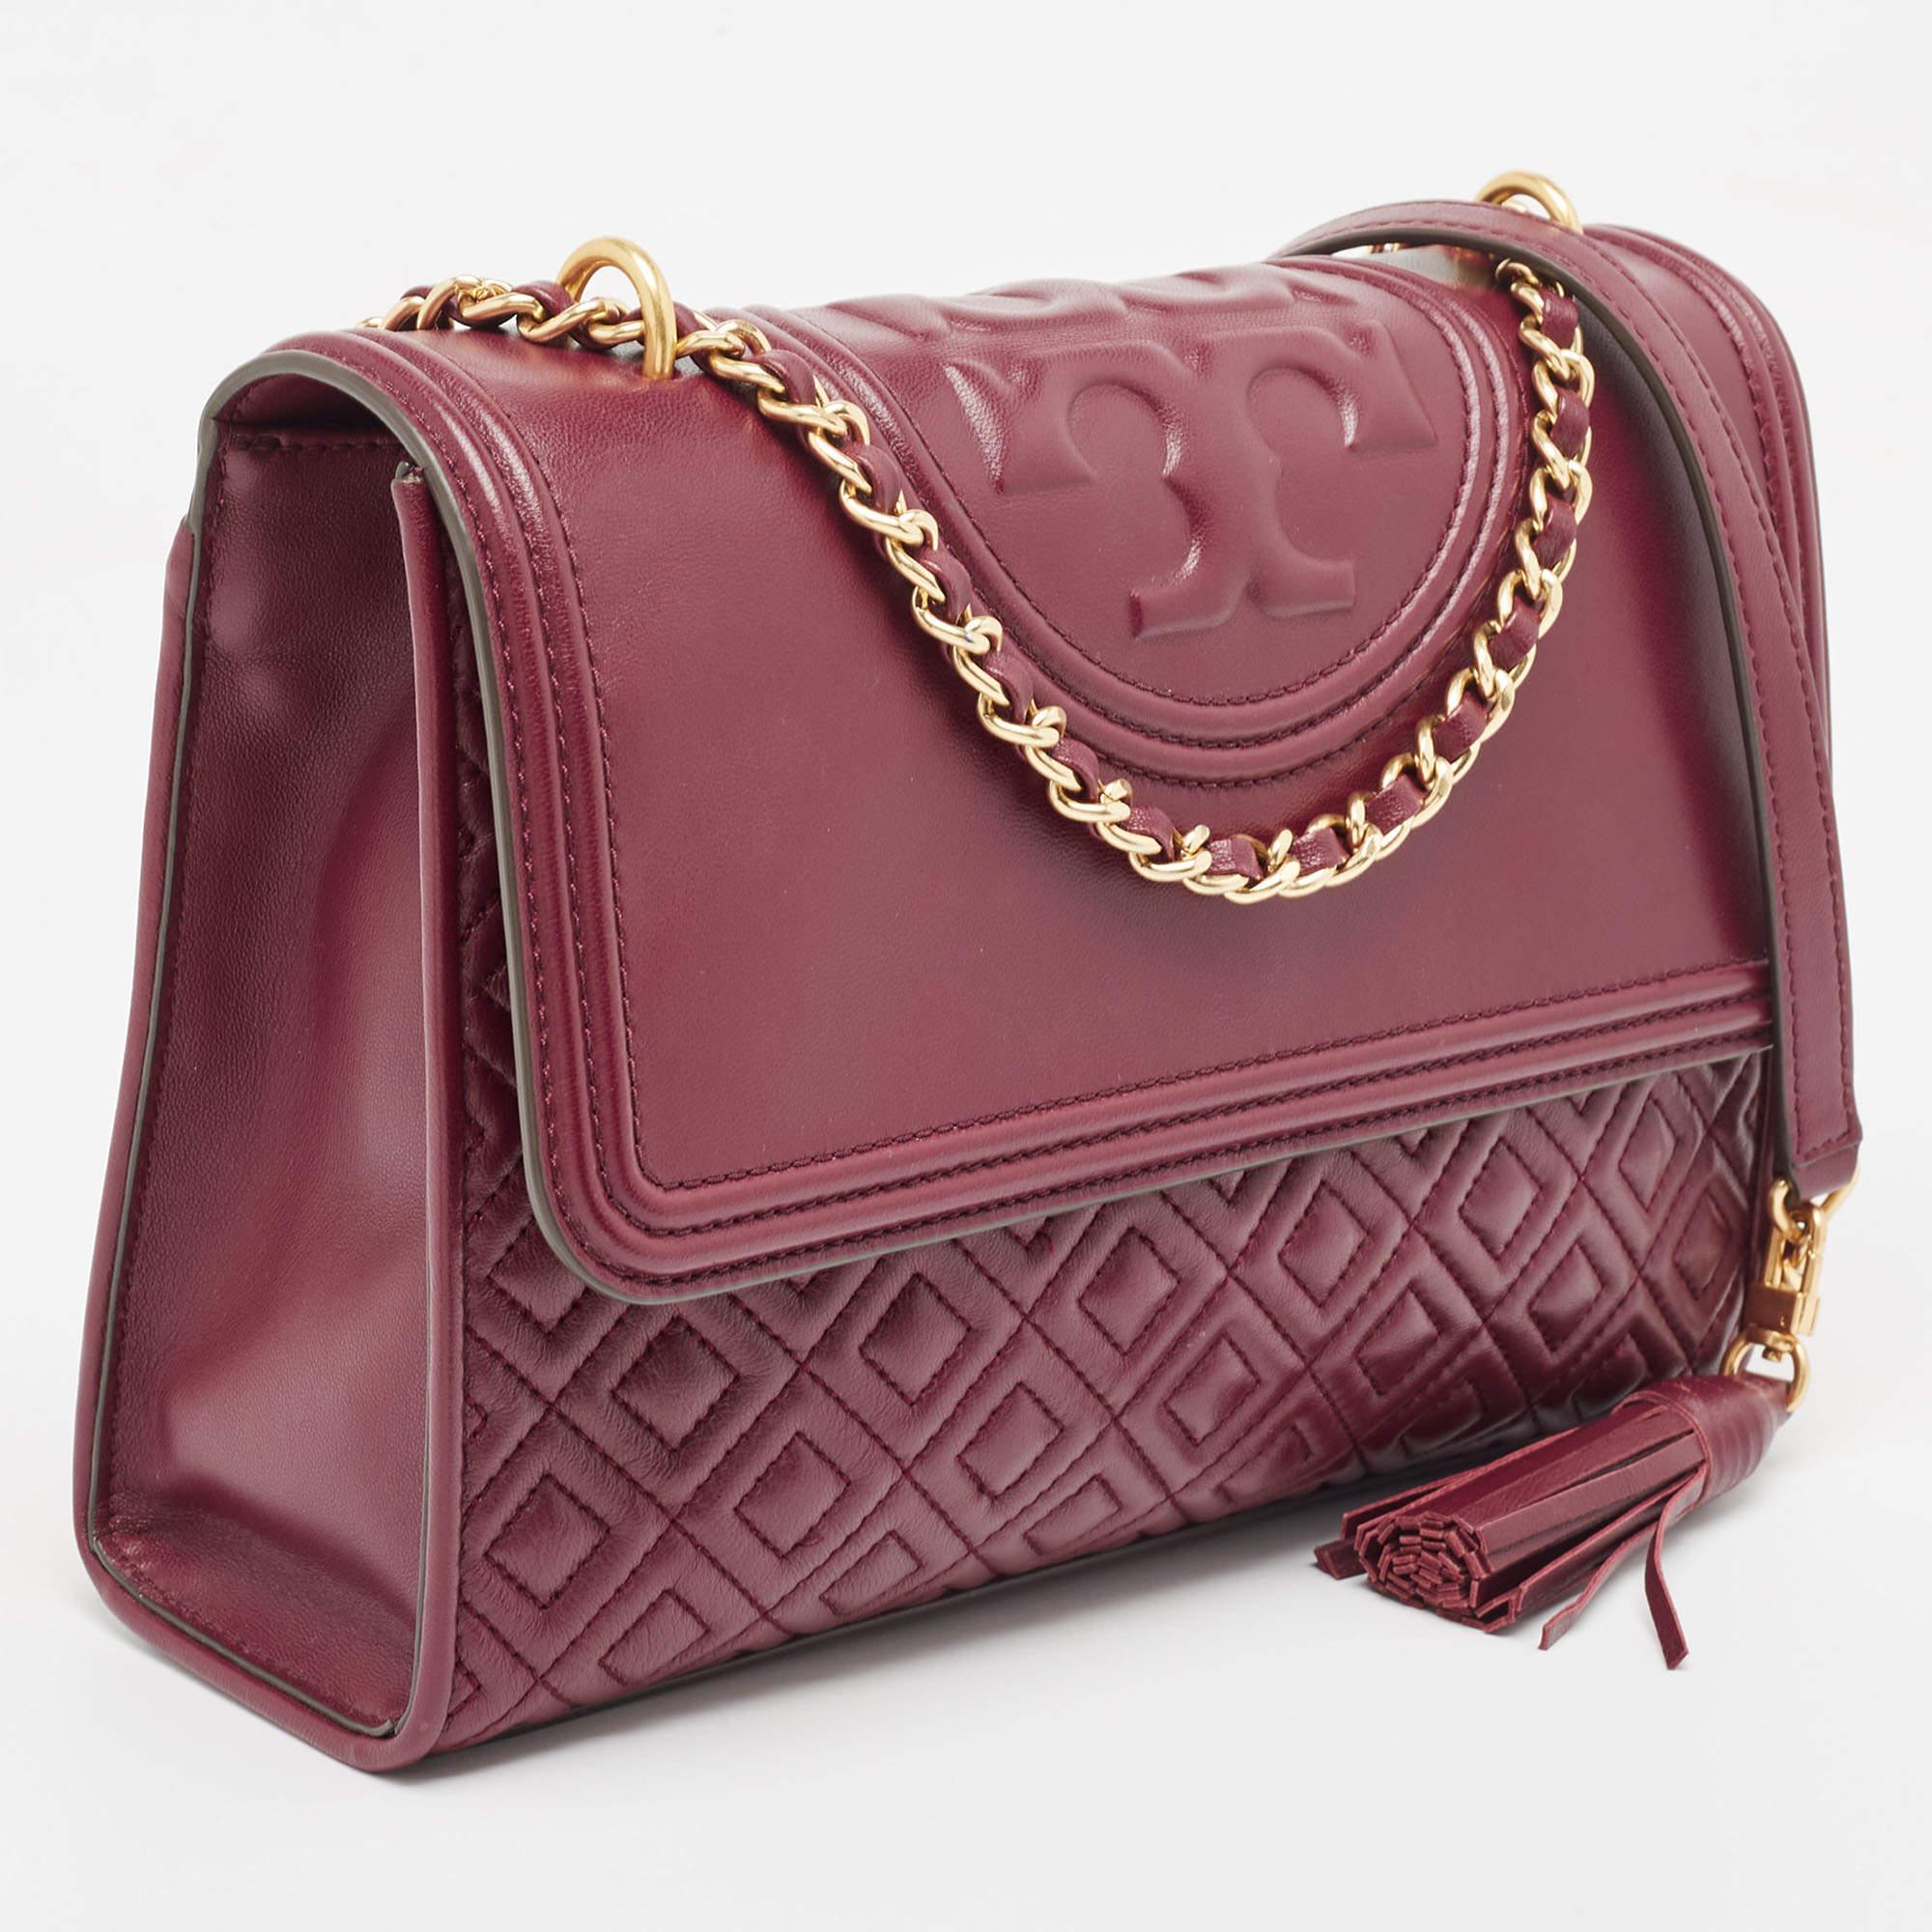 Tory Burch Burgundy Leather Fleming Crossbody Bag In Excellent Condition For Sale In Dubai, Al Qouz 2